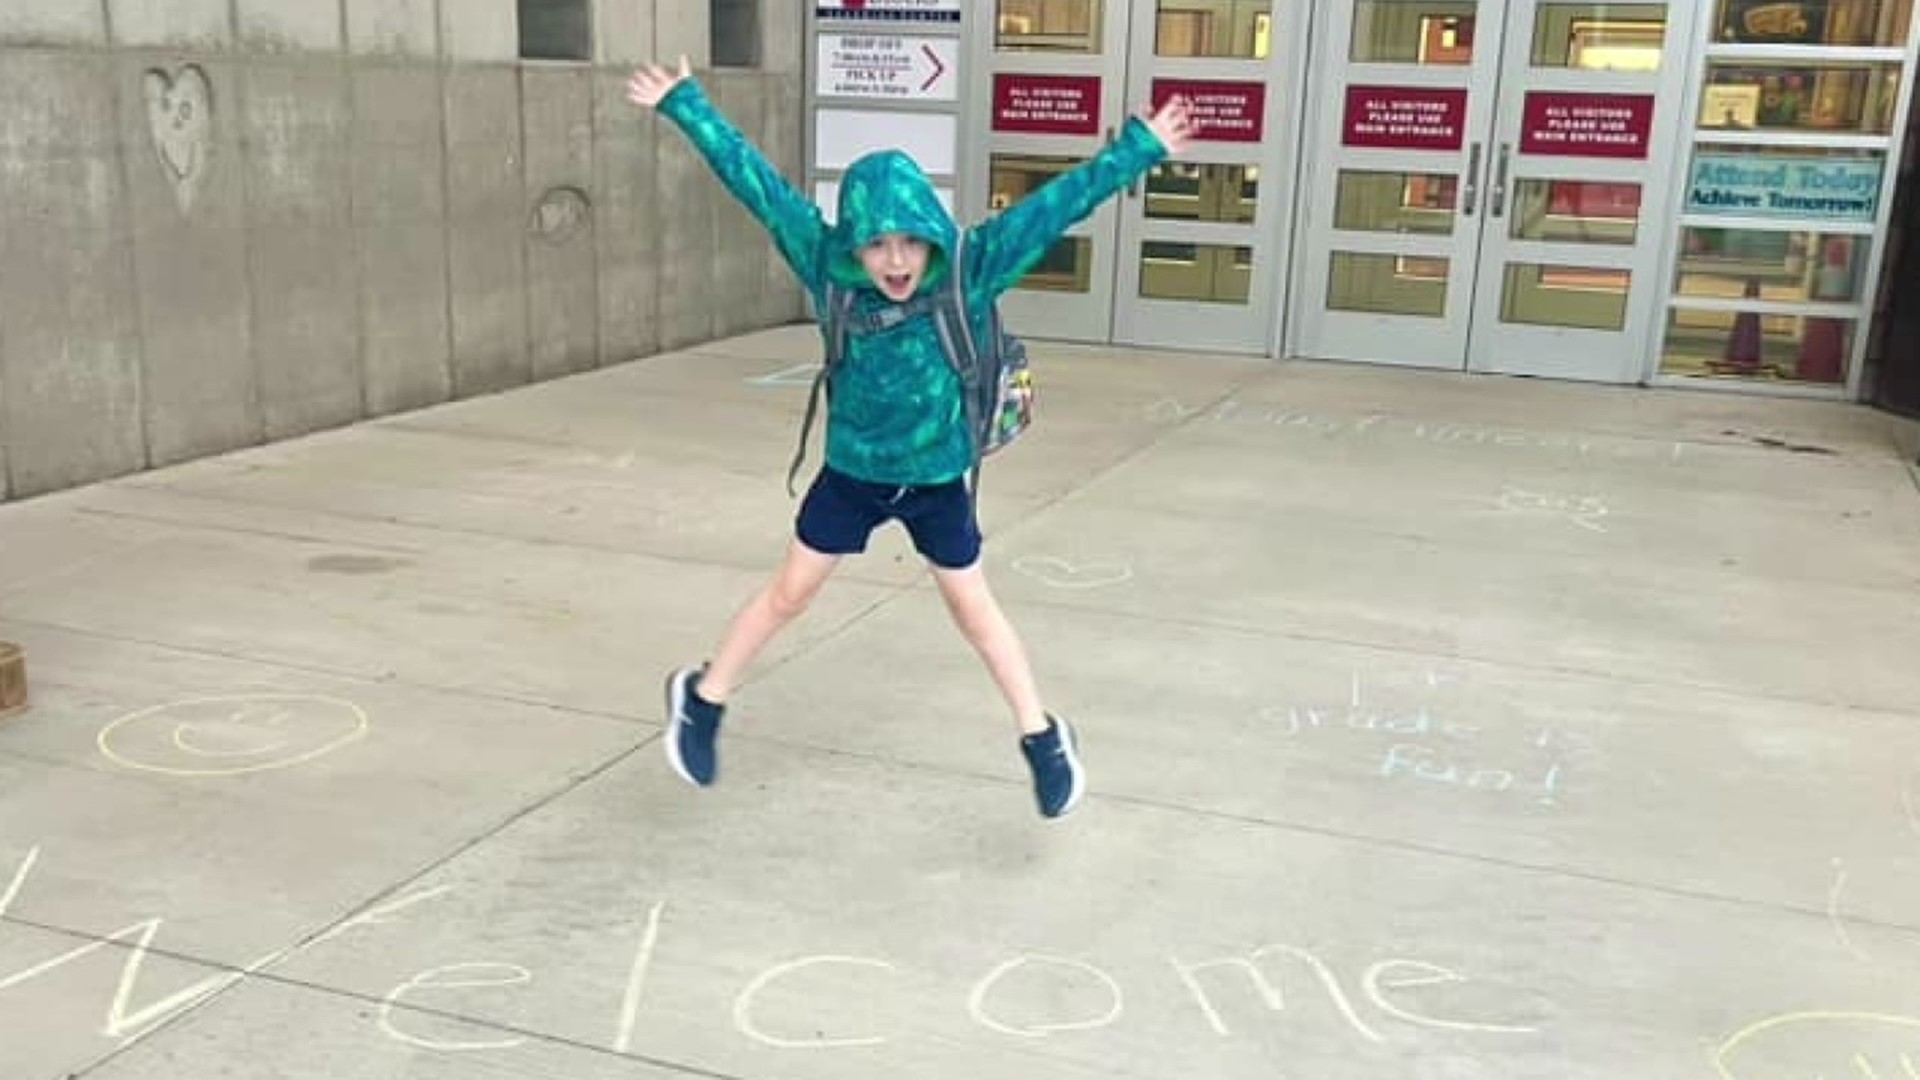 They've become a big part of back to school—the photos all over social media. When you look at a lot of them, you realize they tell quite a story.